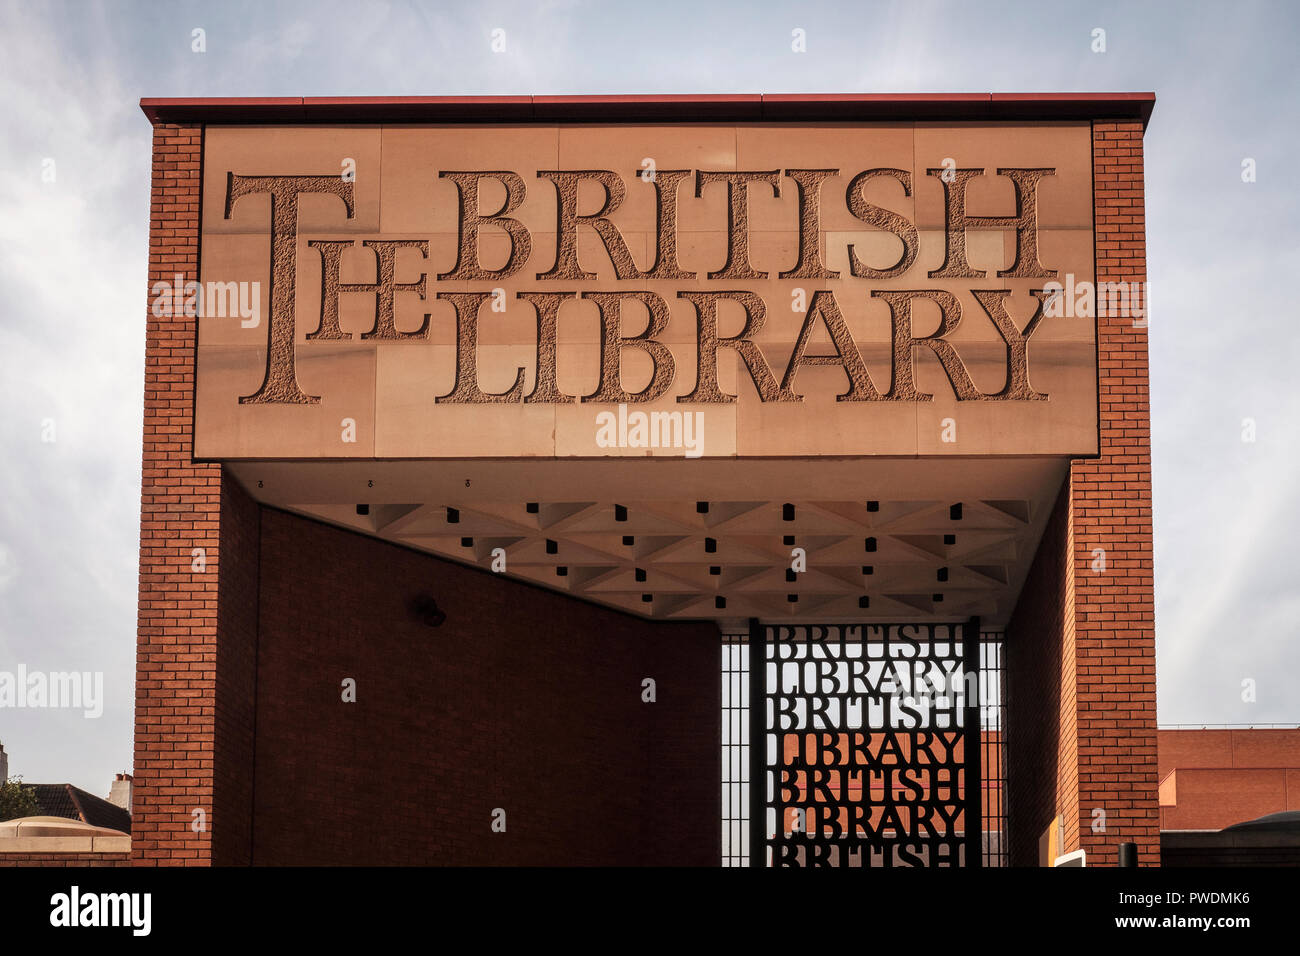 England,London,The Gate to the British Library.The British Library is the national library of the United Kingdom and the largest national library in t Stock Photo